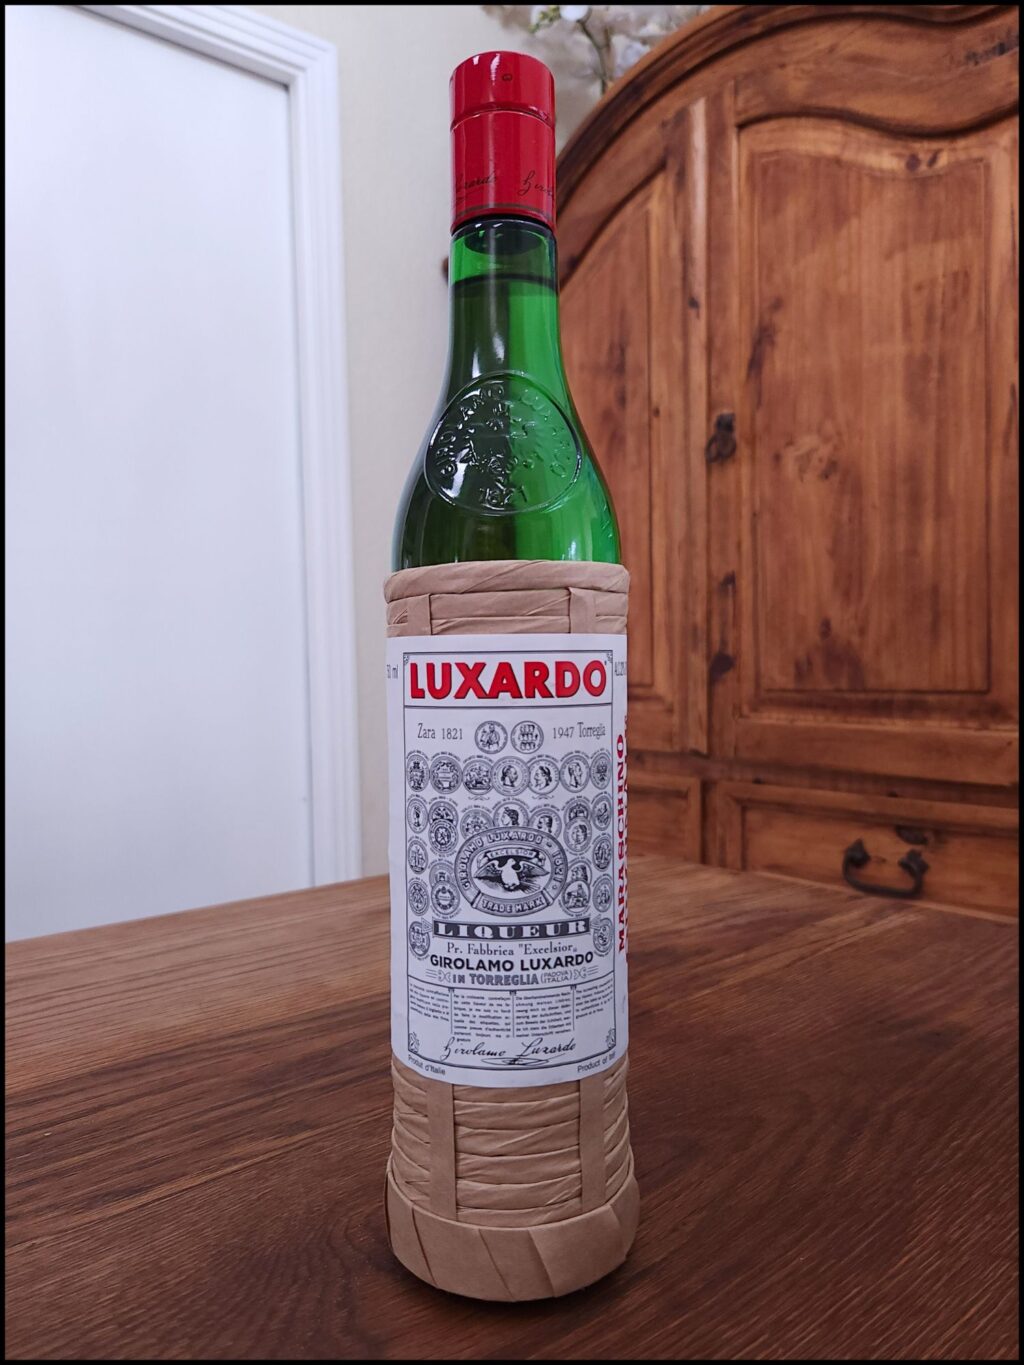 bottle of Luxardo Maraschino Liqueur sitting on a wooden table, in front of a mixed white and wooden background